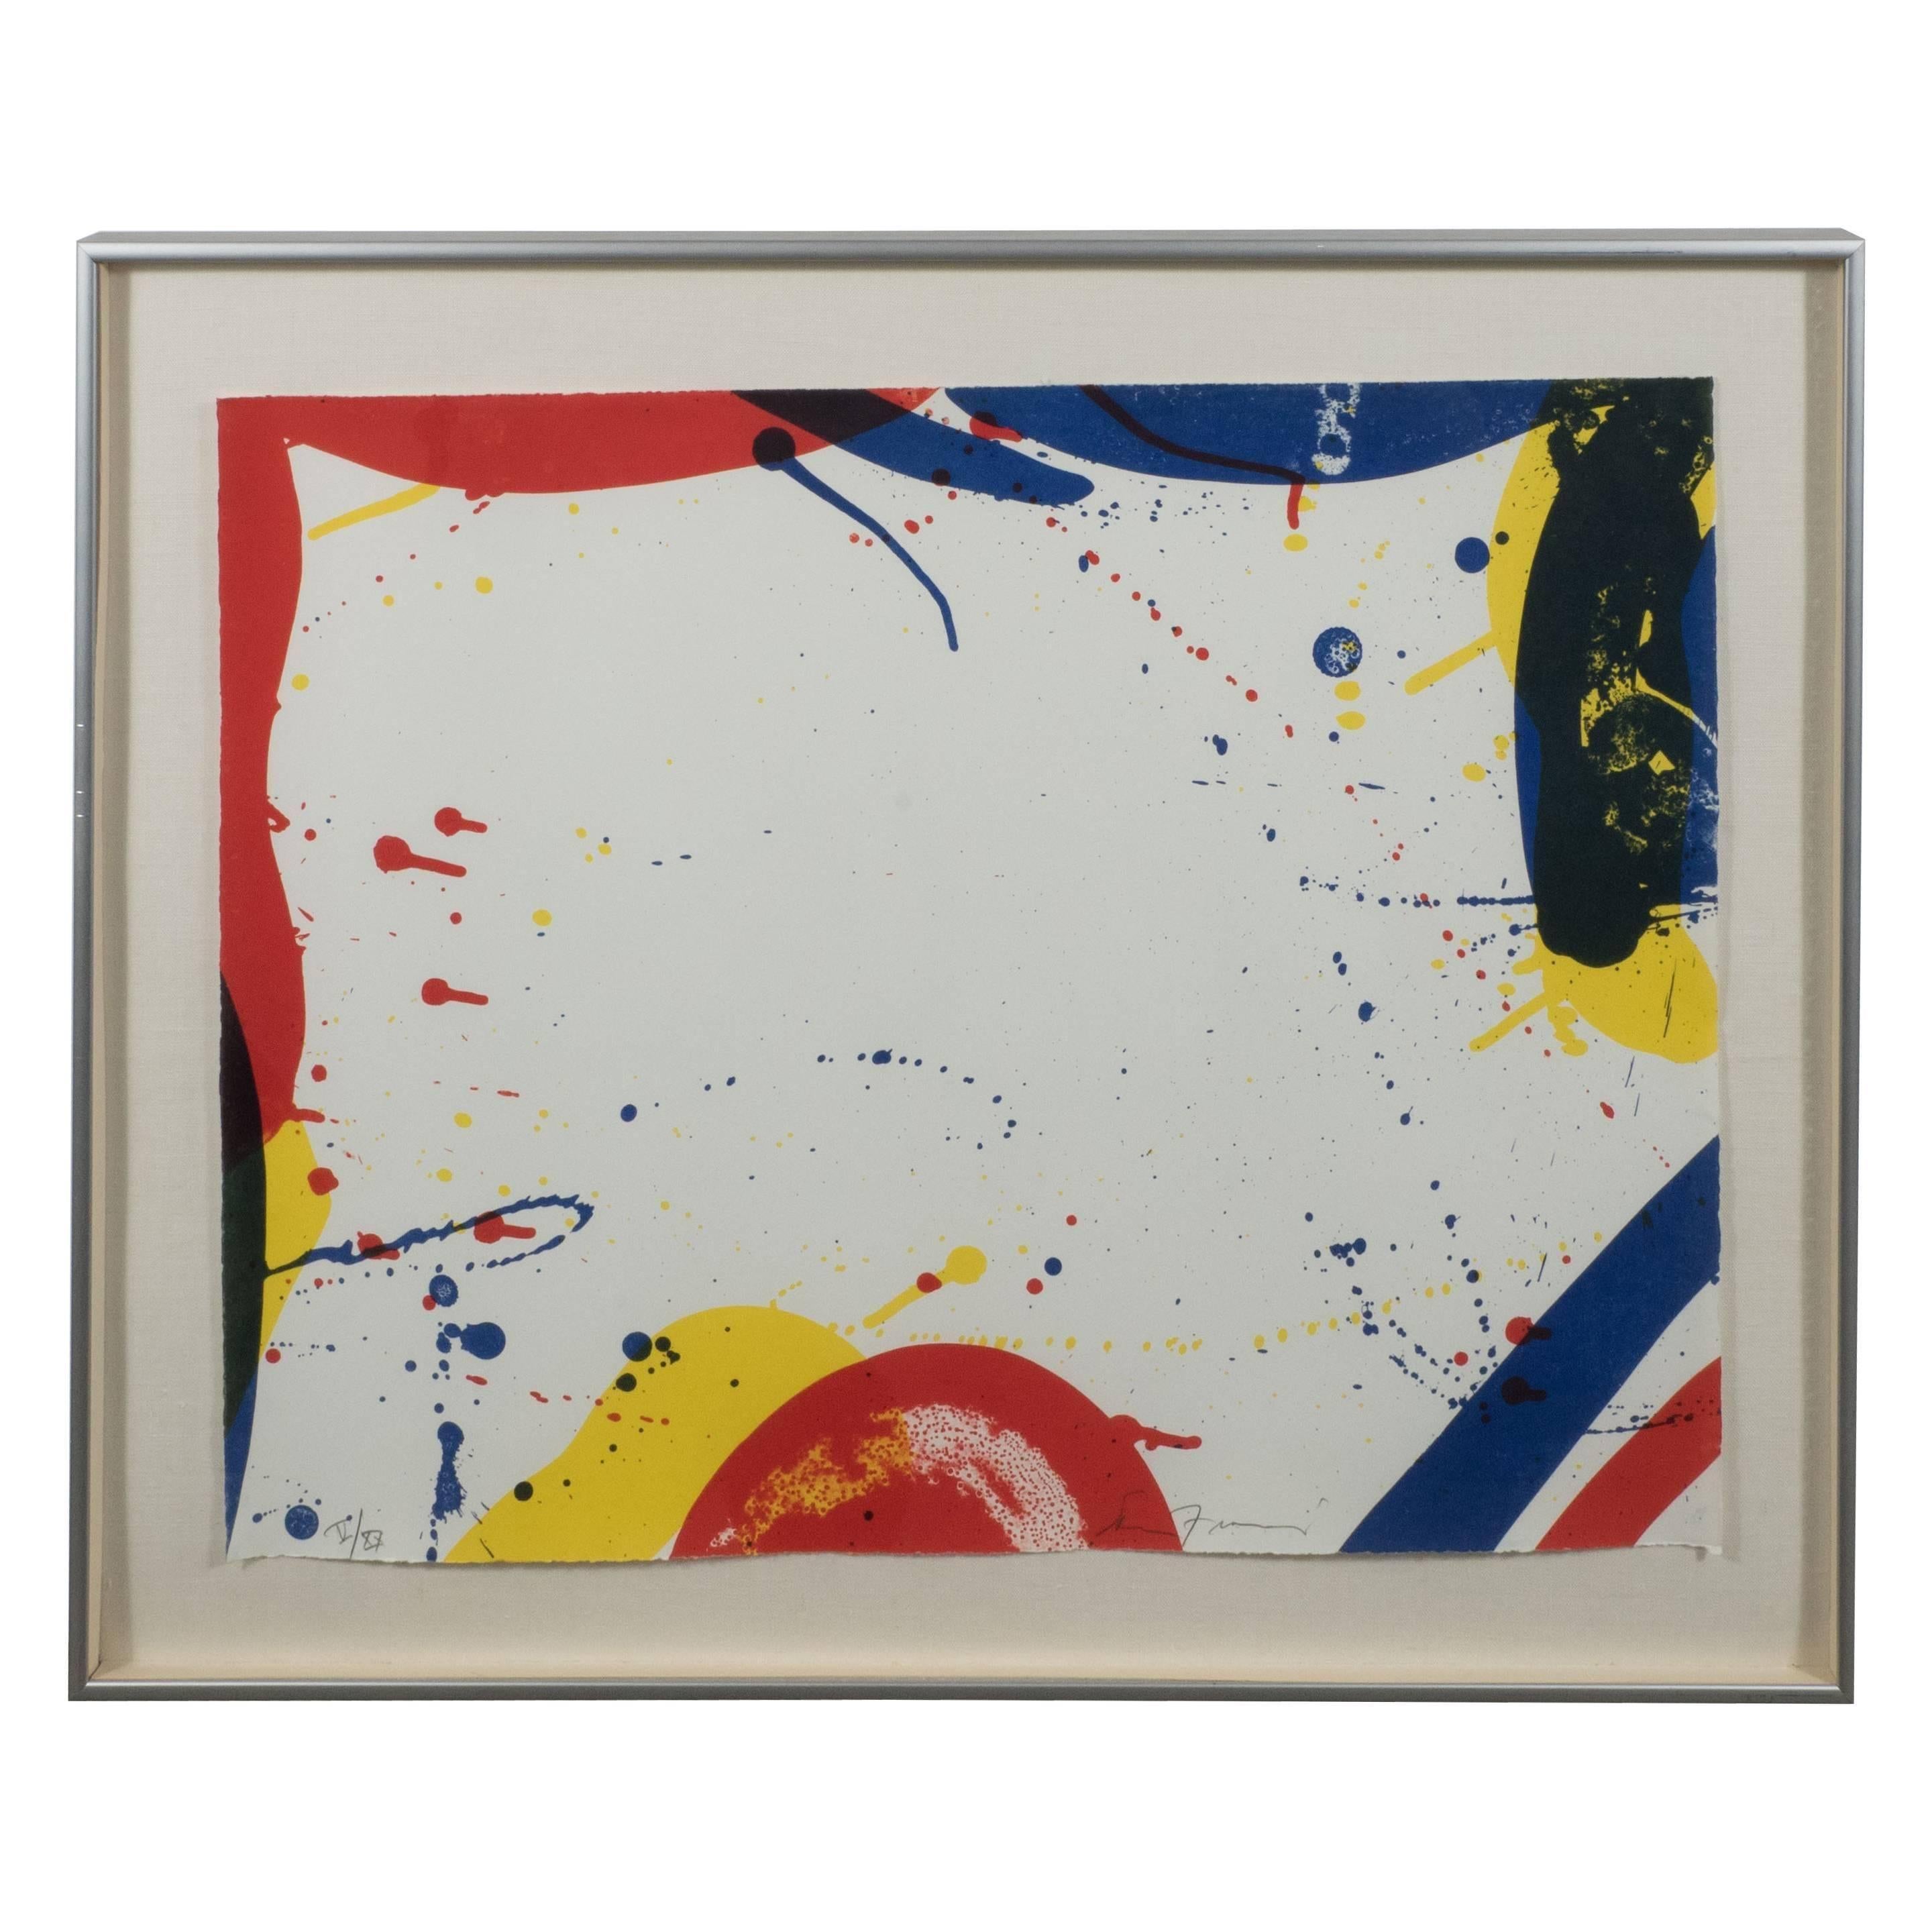 Sam Francis
&quot;Untitled&quot; from Portfolio 9 (L. L. 87) lithograph in colors, 1967, hand signed by the artist in pencil and numbered V/XX, number five out of an edition of 20 in pencil,
Measures: 17&quot; H X 22&quot; W just the